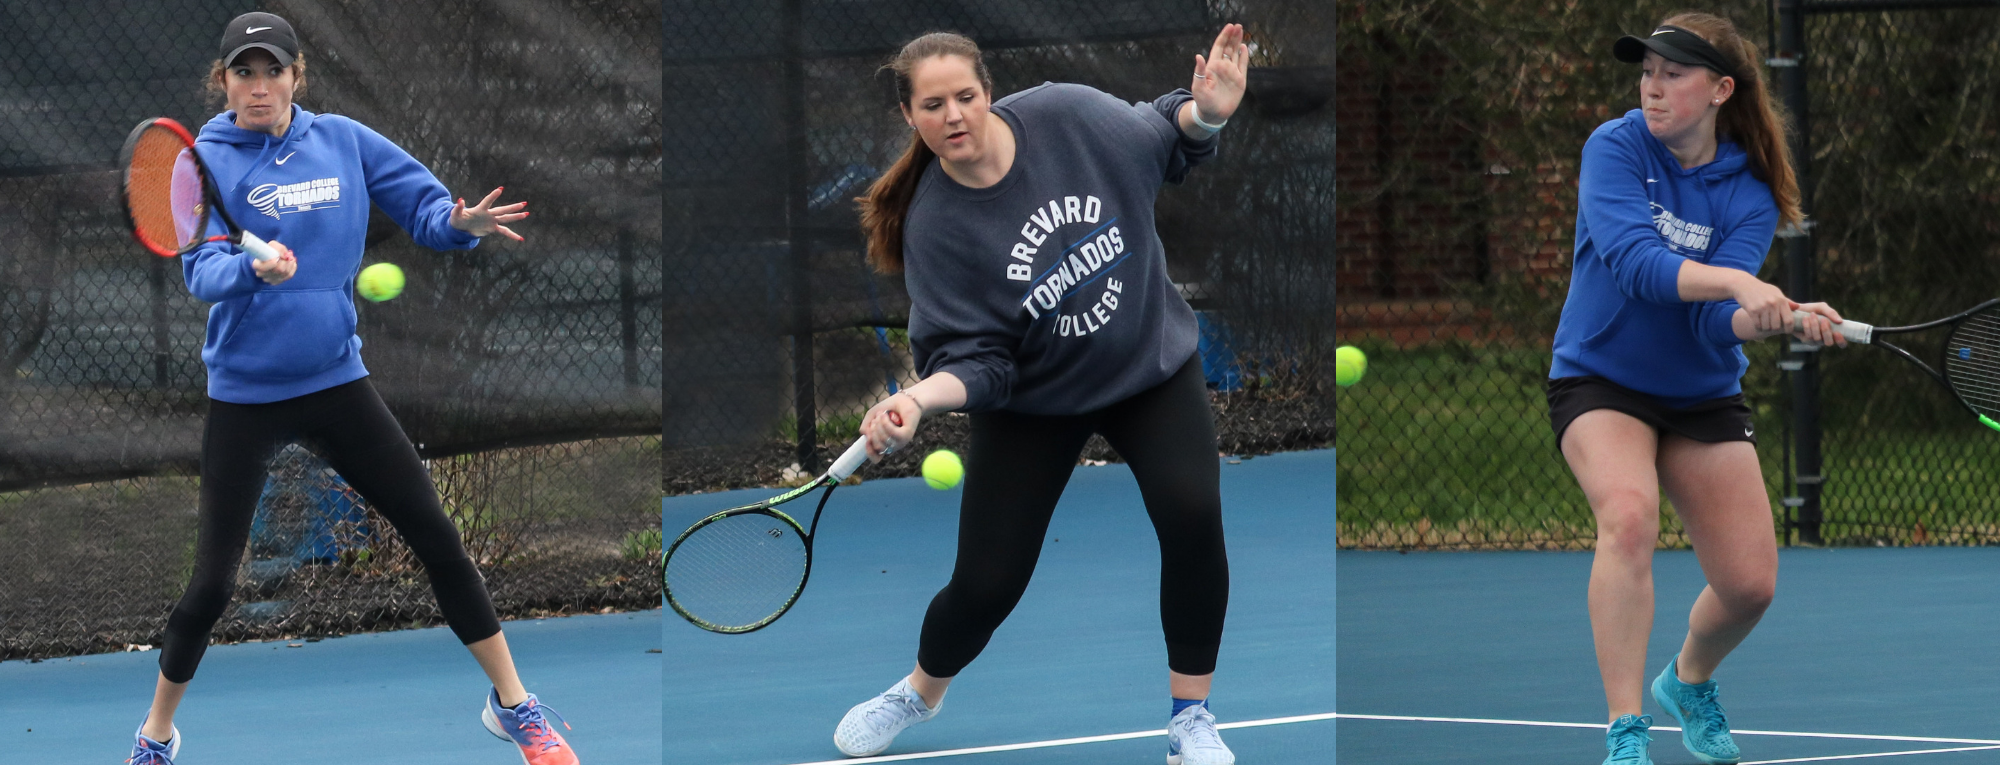 Sepe, Kushner, and Correll Earn Conference, Divisional, and Sportsmanship Honors Following Record-Breaking Regular Season